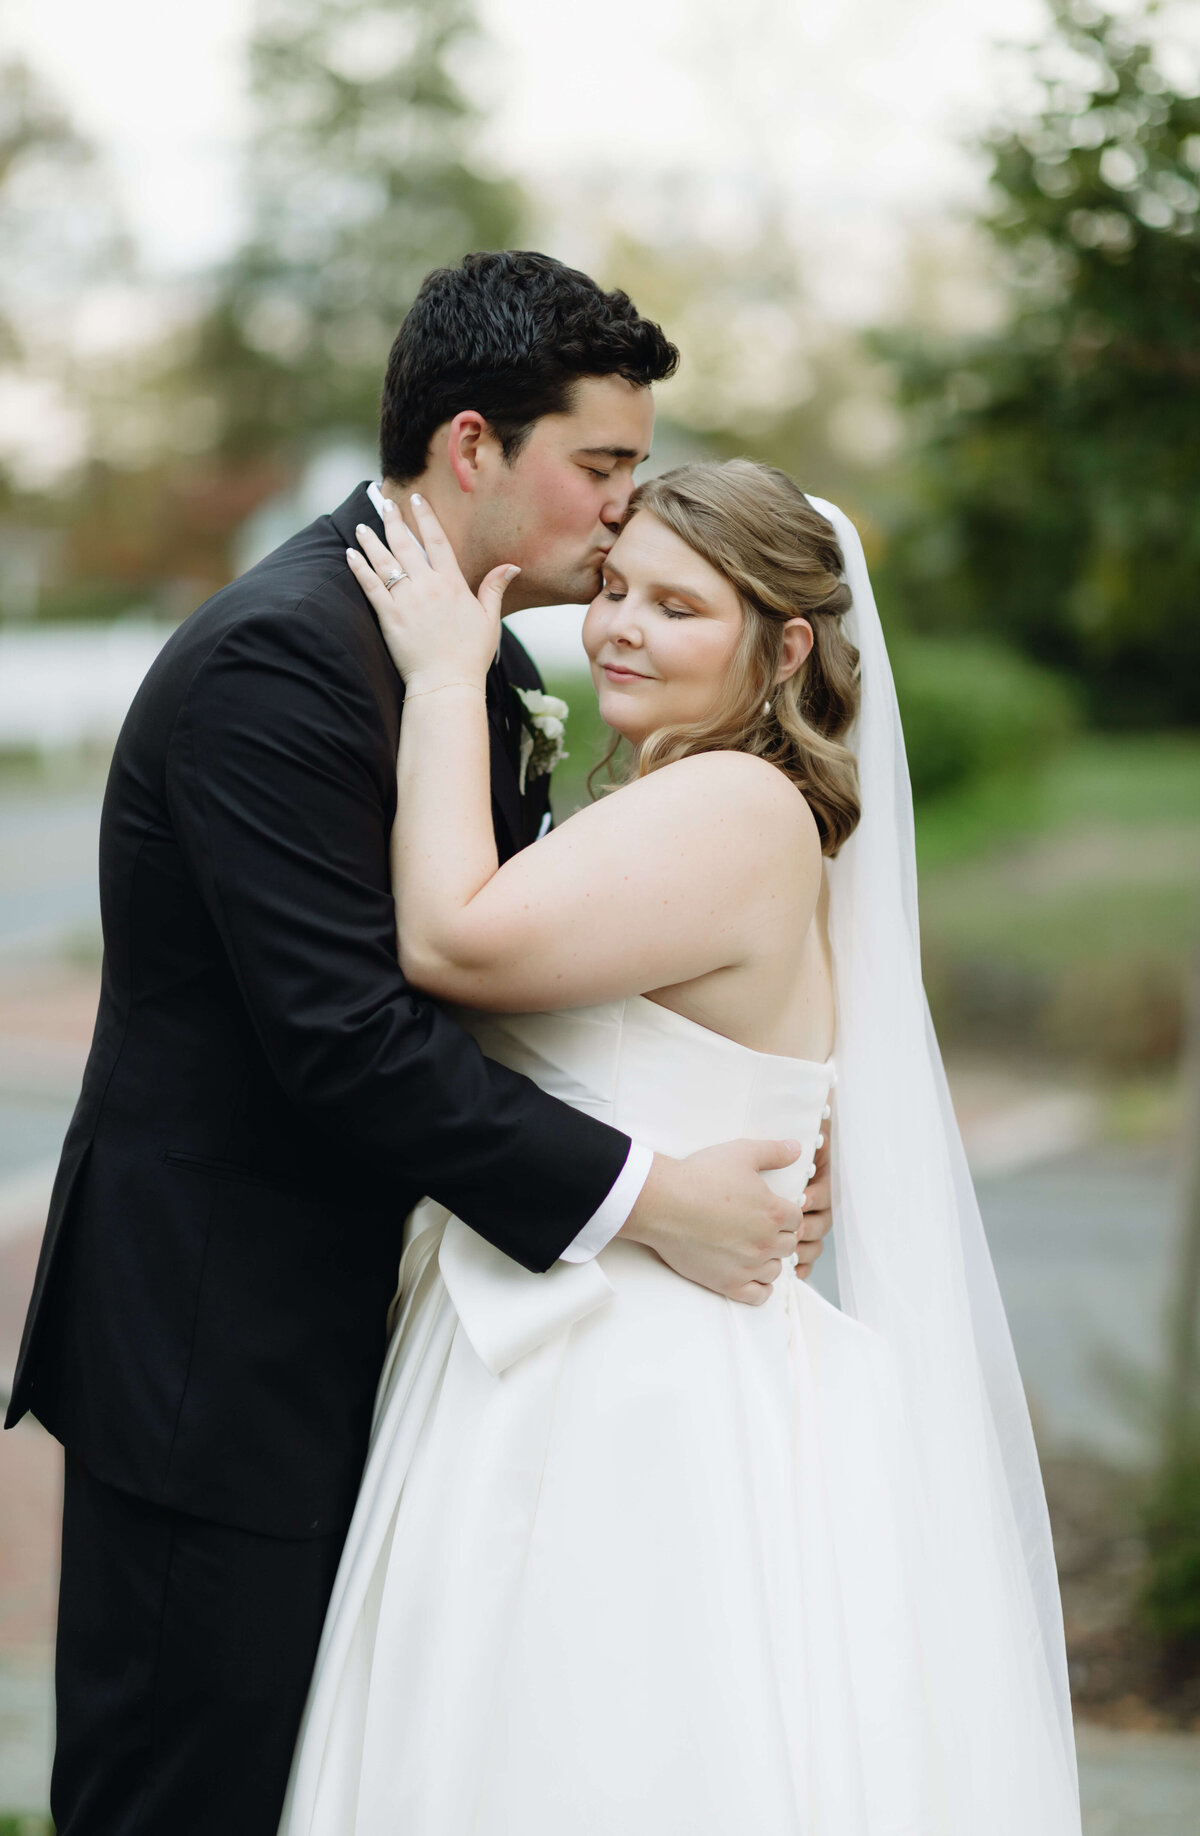 Virginia wedding photographer captures bridal photo of groom holding his bride by the waist and kissing her head as she holds her hands to his neck with a lush garden behind them